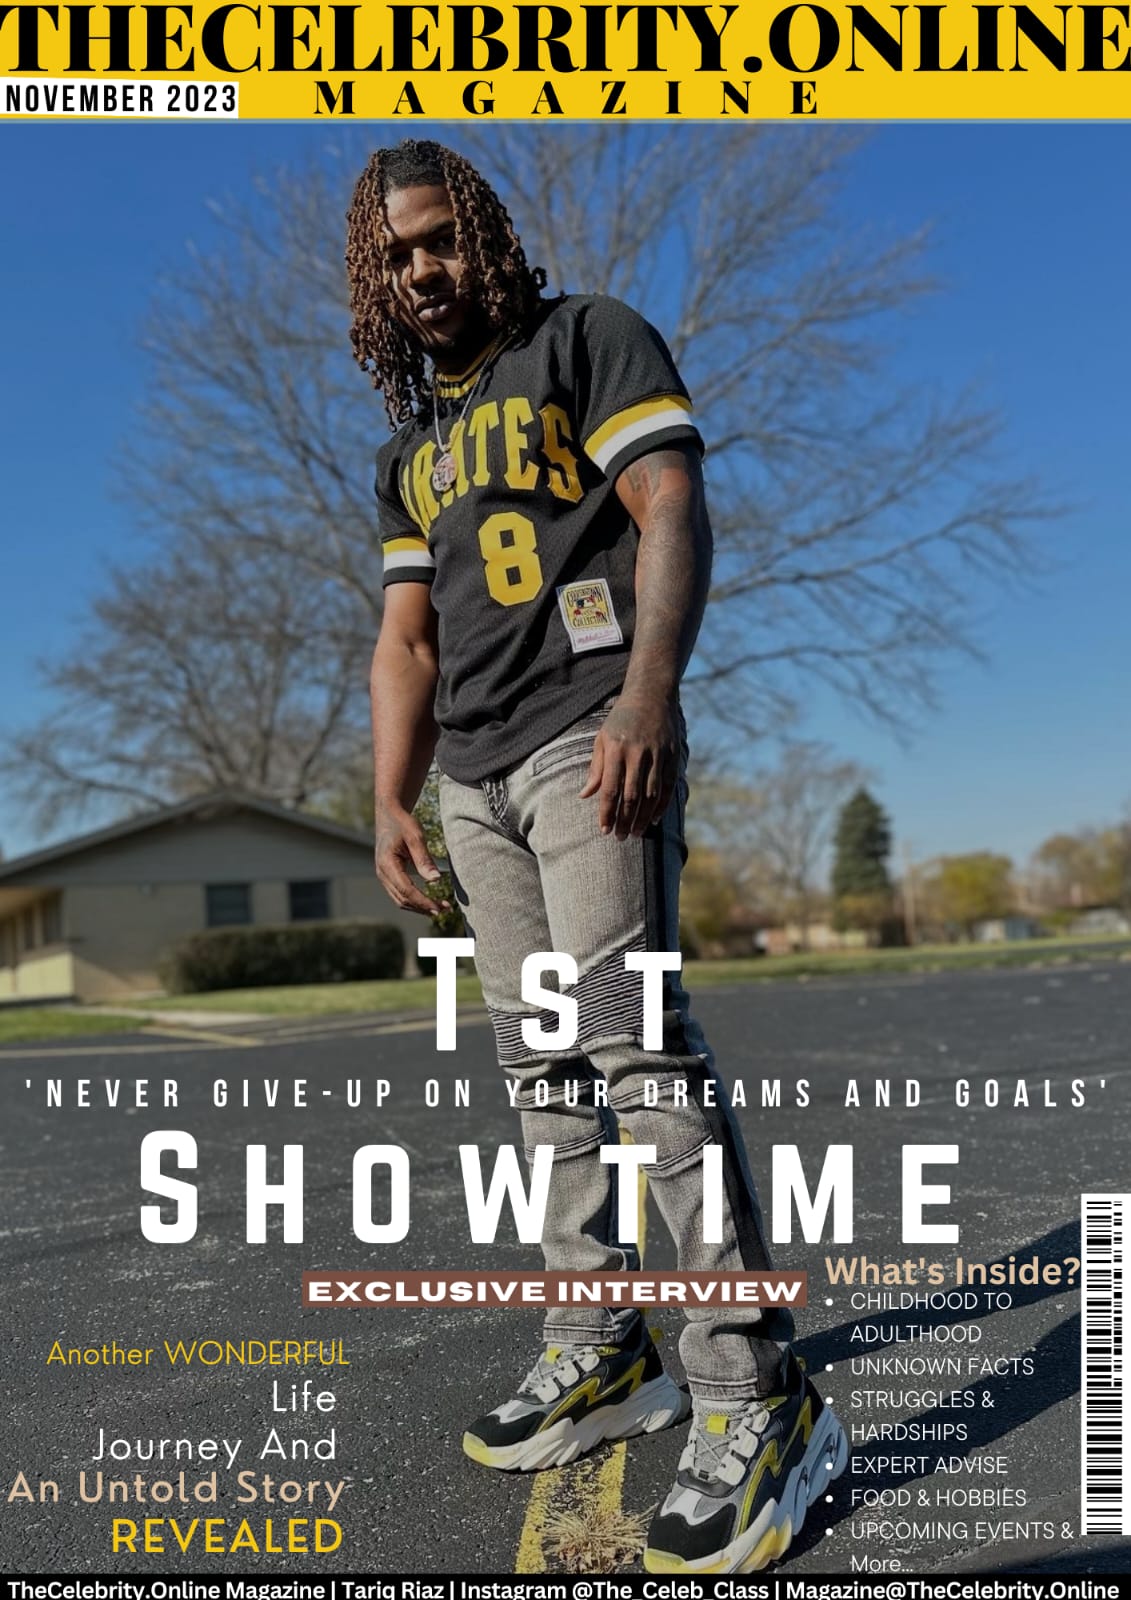 Tst Showtime Exclusive Interview – ‘Never GiveUp On Your Dreams And Goals’